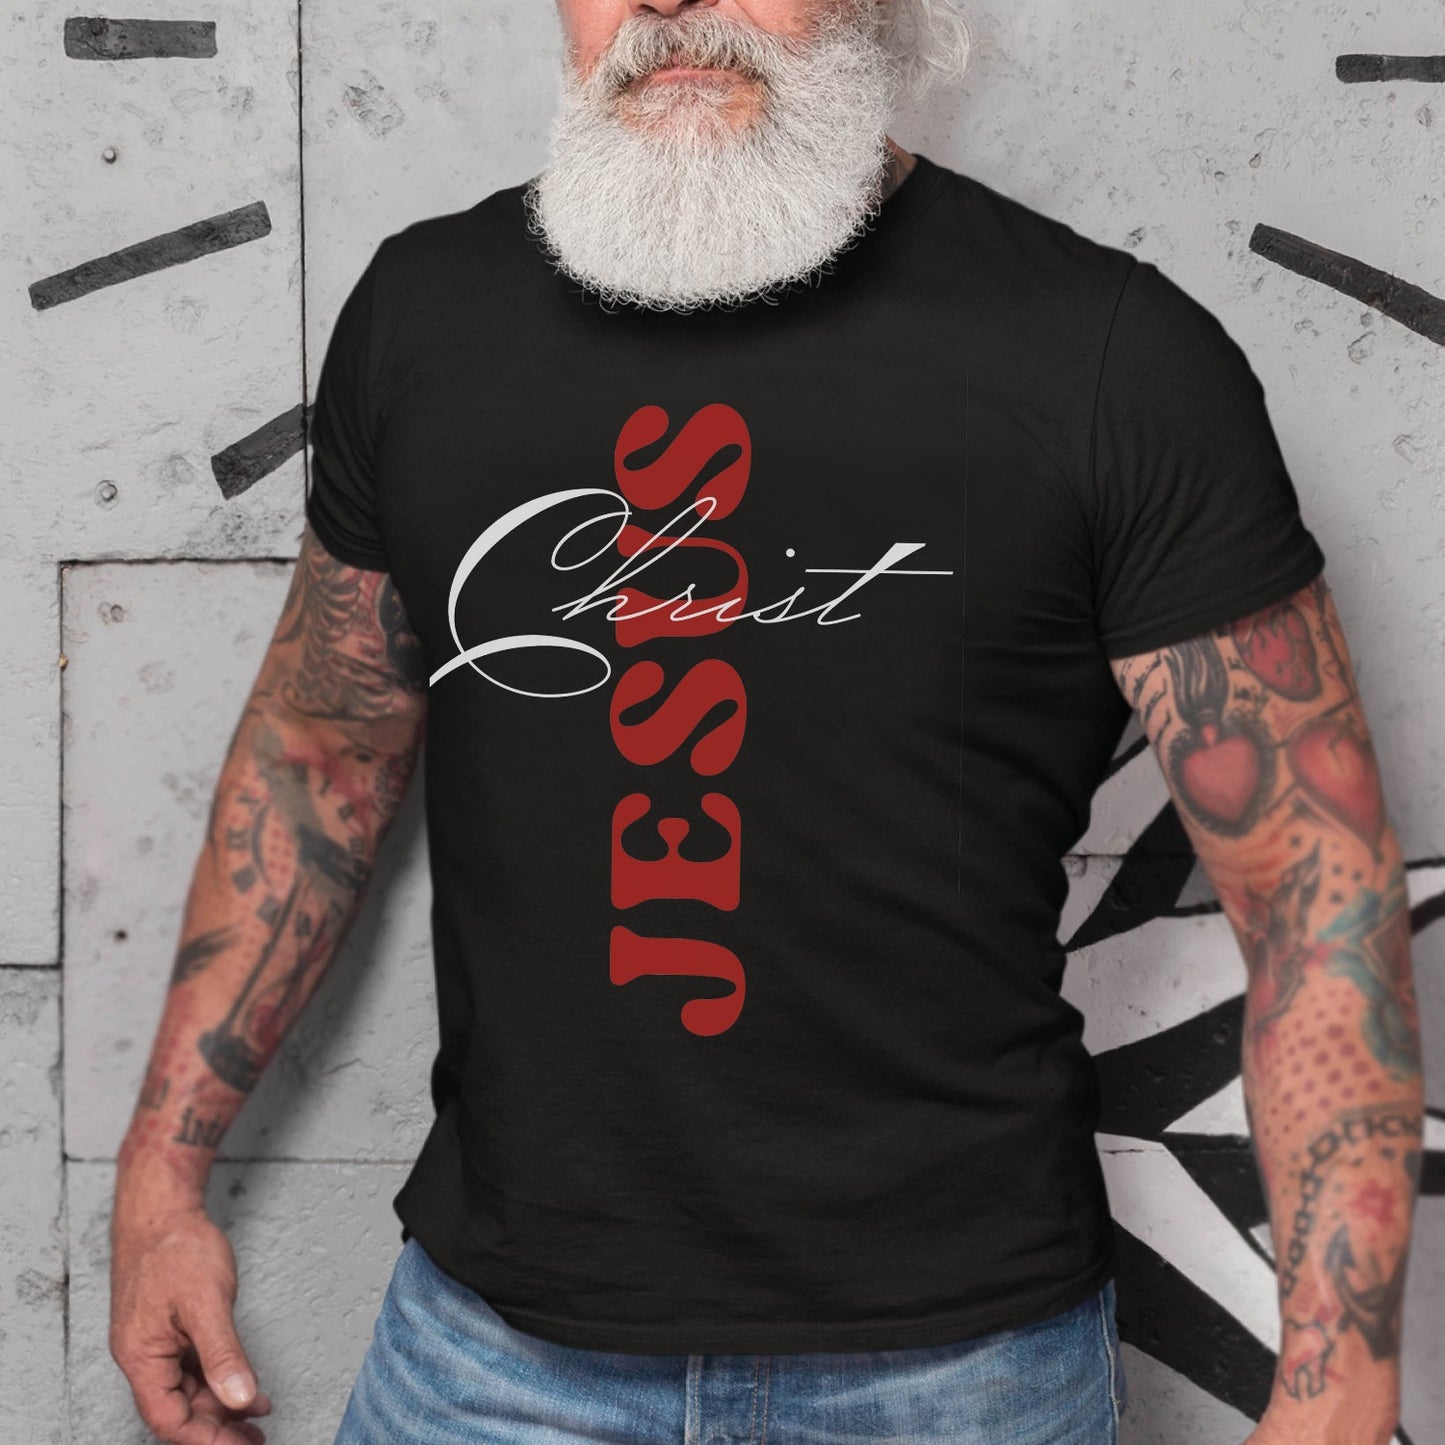 Edgy Tattoo Man wearing a Black color Christian Comfort Colors 1717 heavyweight unisex t-shirt with faith-based bible typography that says, "Jesus Christ" and white and red letters in the shape of the cross, created for men and women Kingdom believers